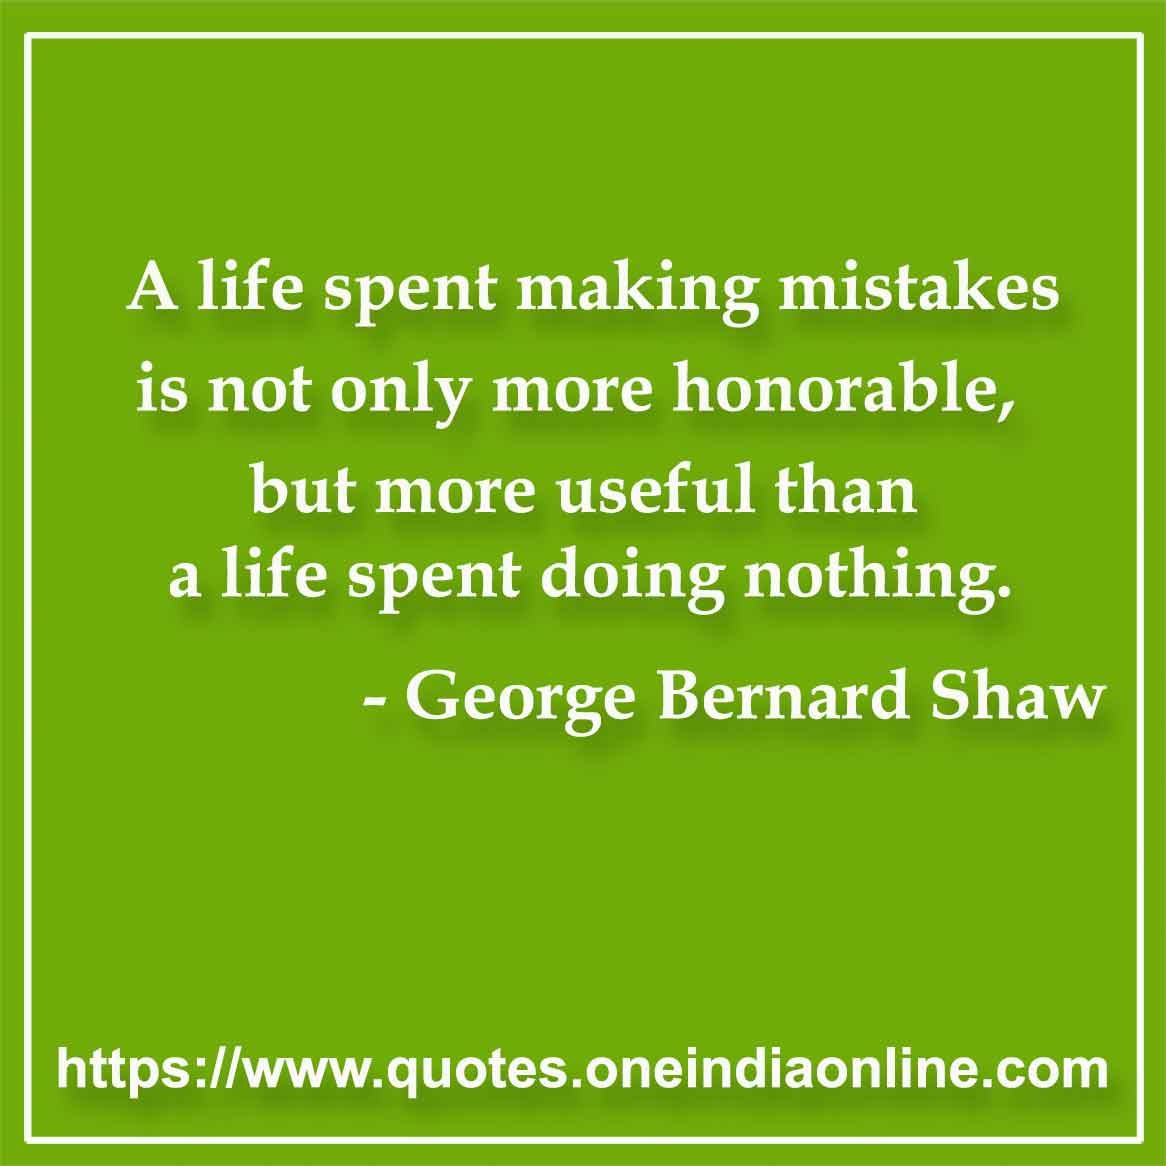 A life spent making mistakes is not only more honorable, but more useful than a life spent doing nothing.

- Mistake Quotes by George Bernard Shaw 